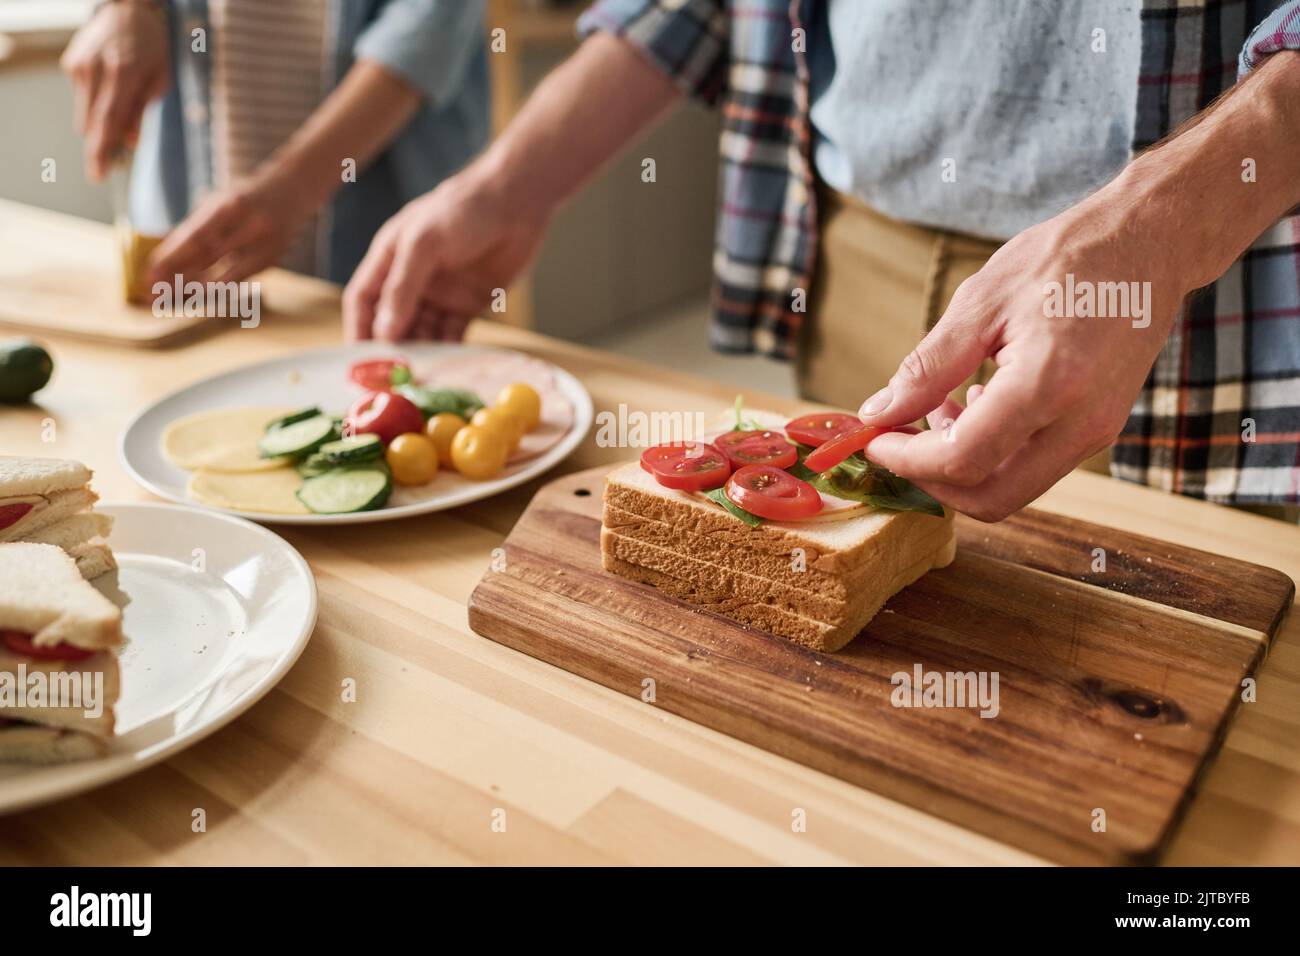 Close-up of young couple cooking sandwiches with vegetables for breakfast together at table Stock Photo